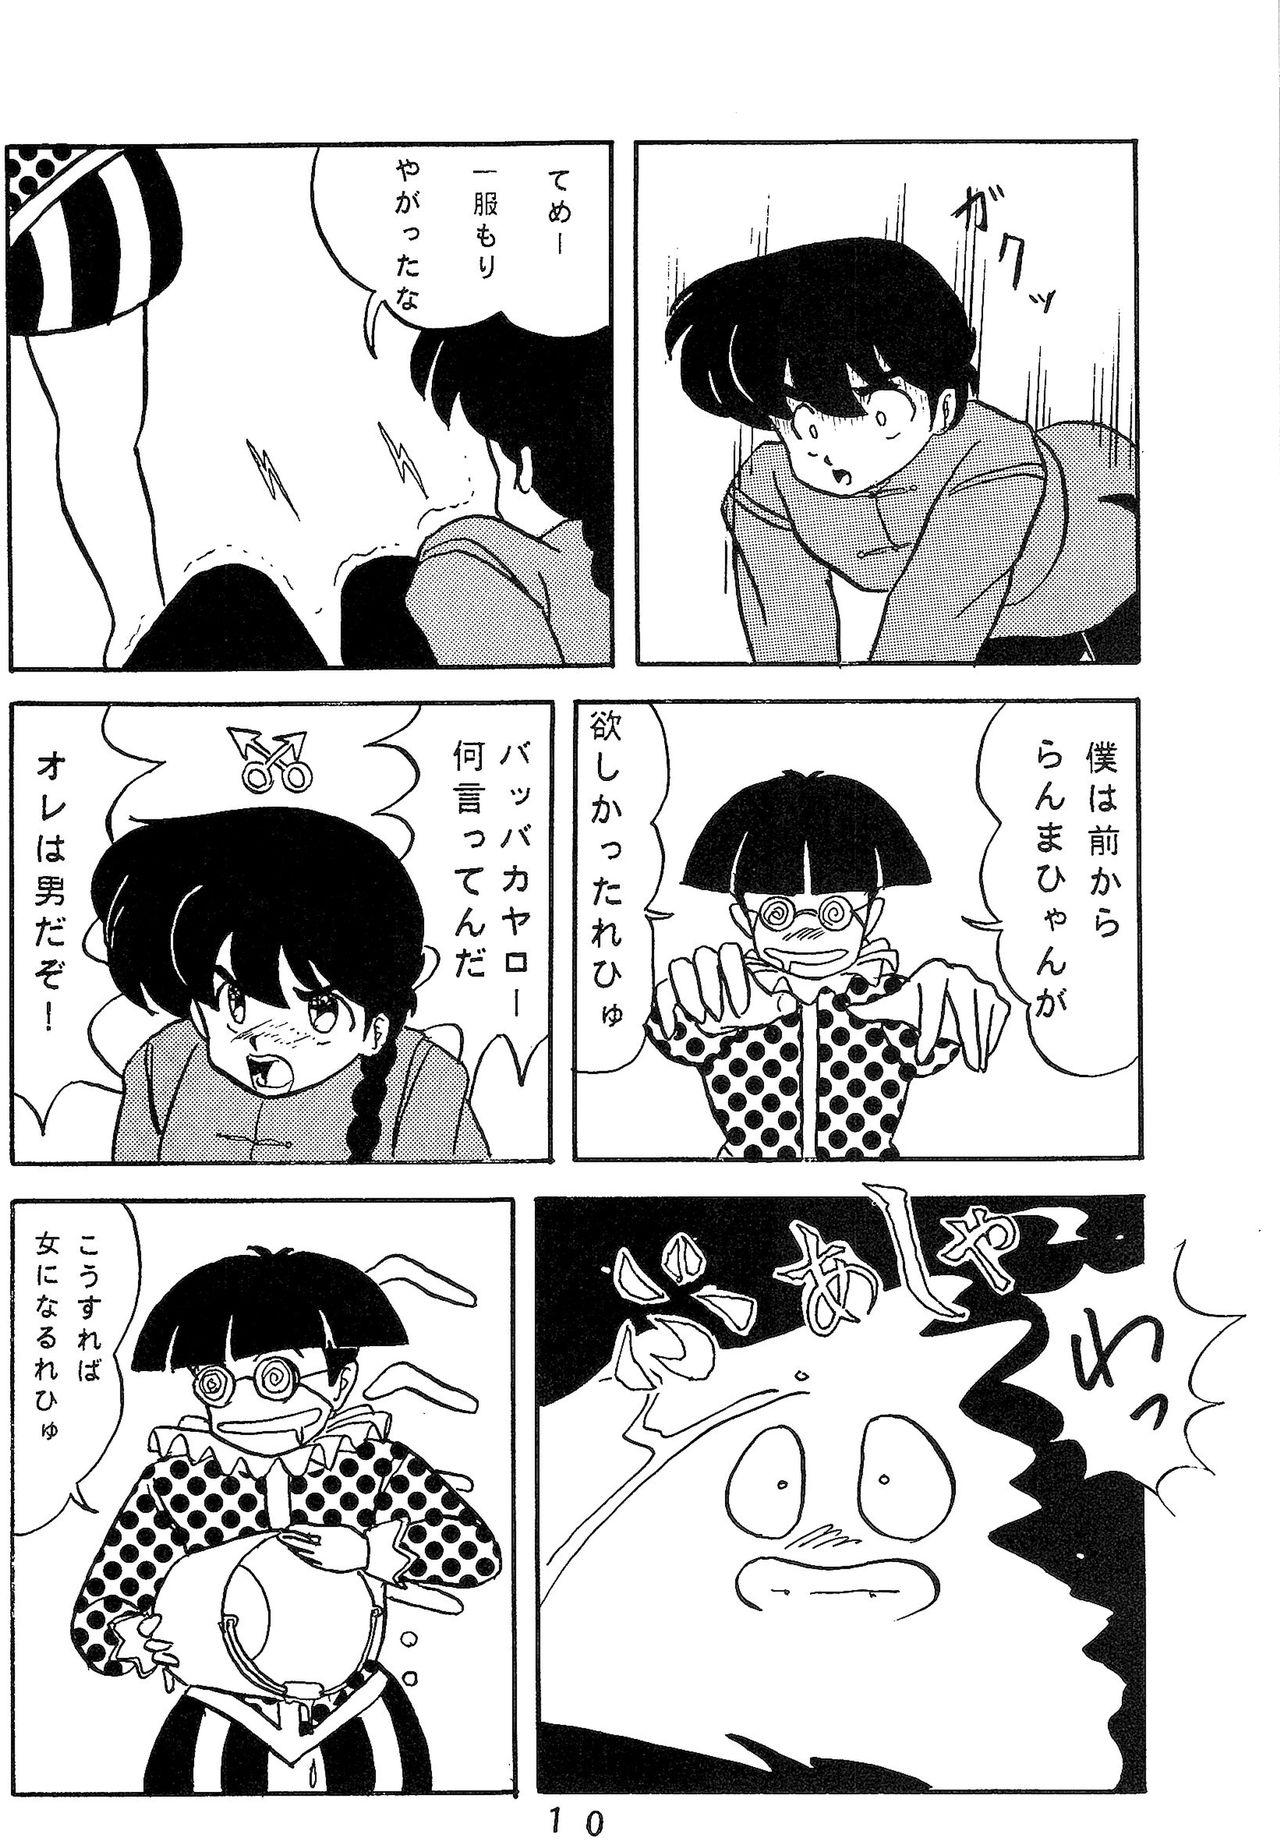 Pay Route RANMA - Ranma 12 Beurette - Page 9